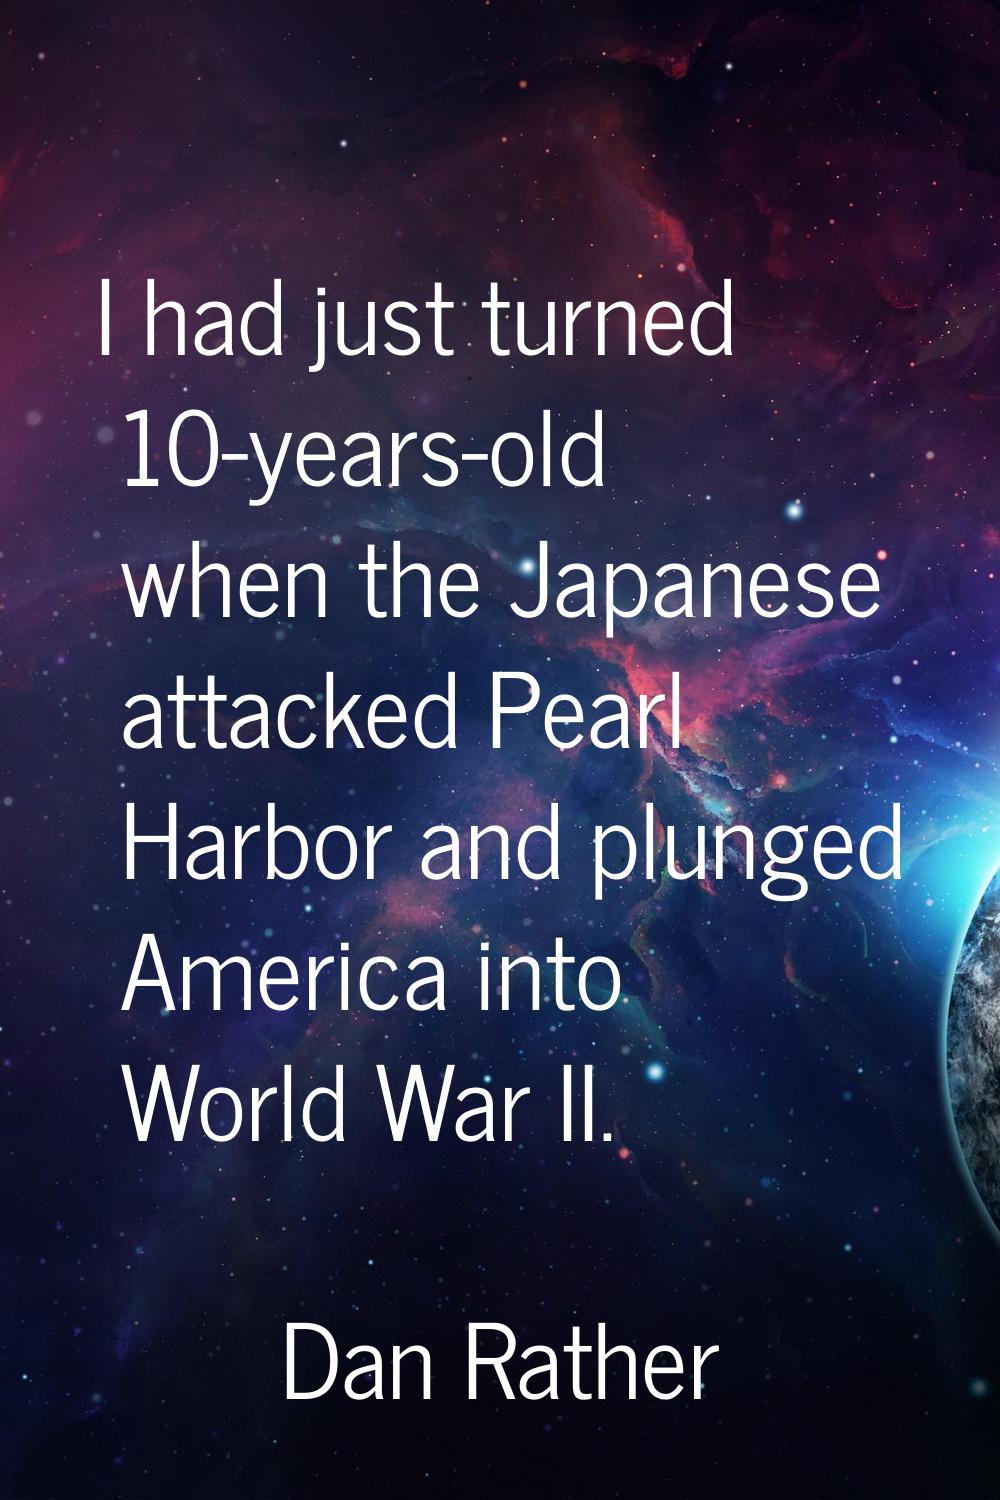 I had just turned 10-years-old when the Japanese attacked Pearl Harbor and plunged America into Wor